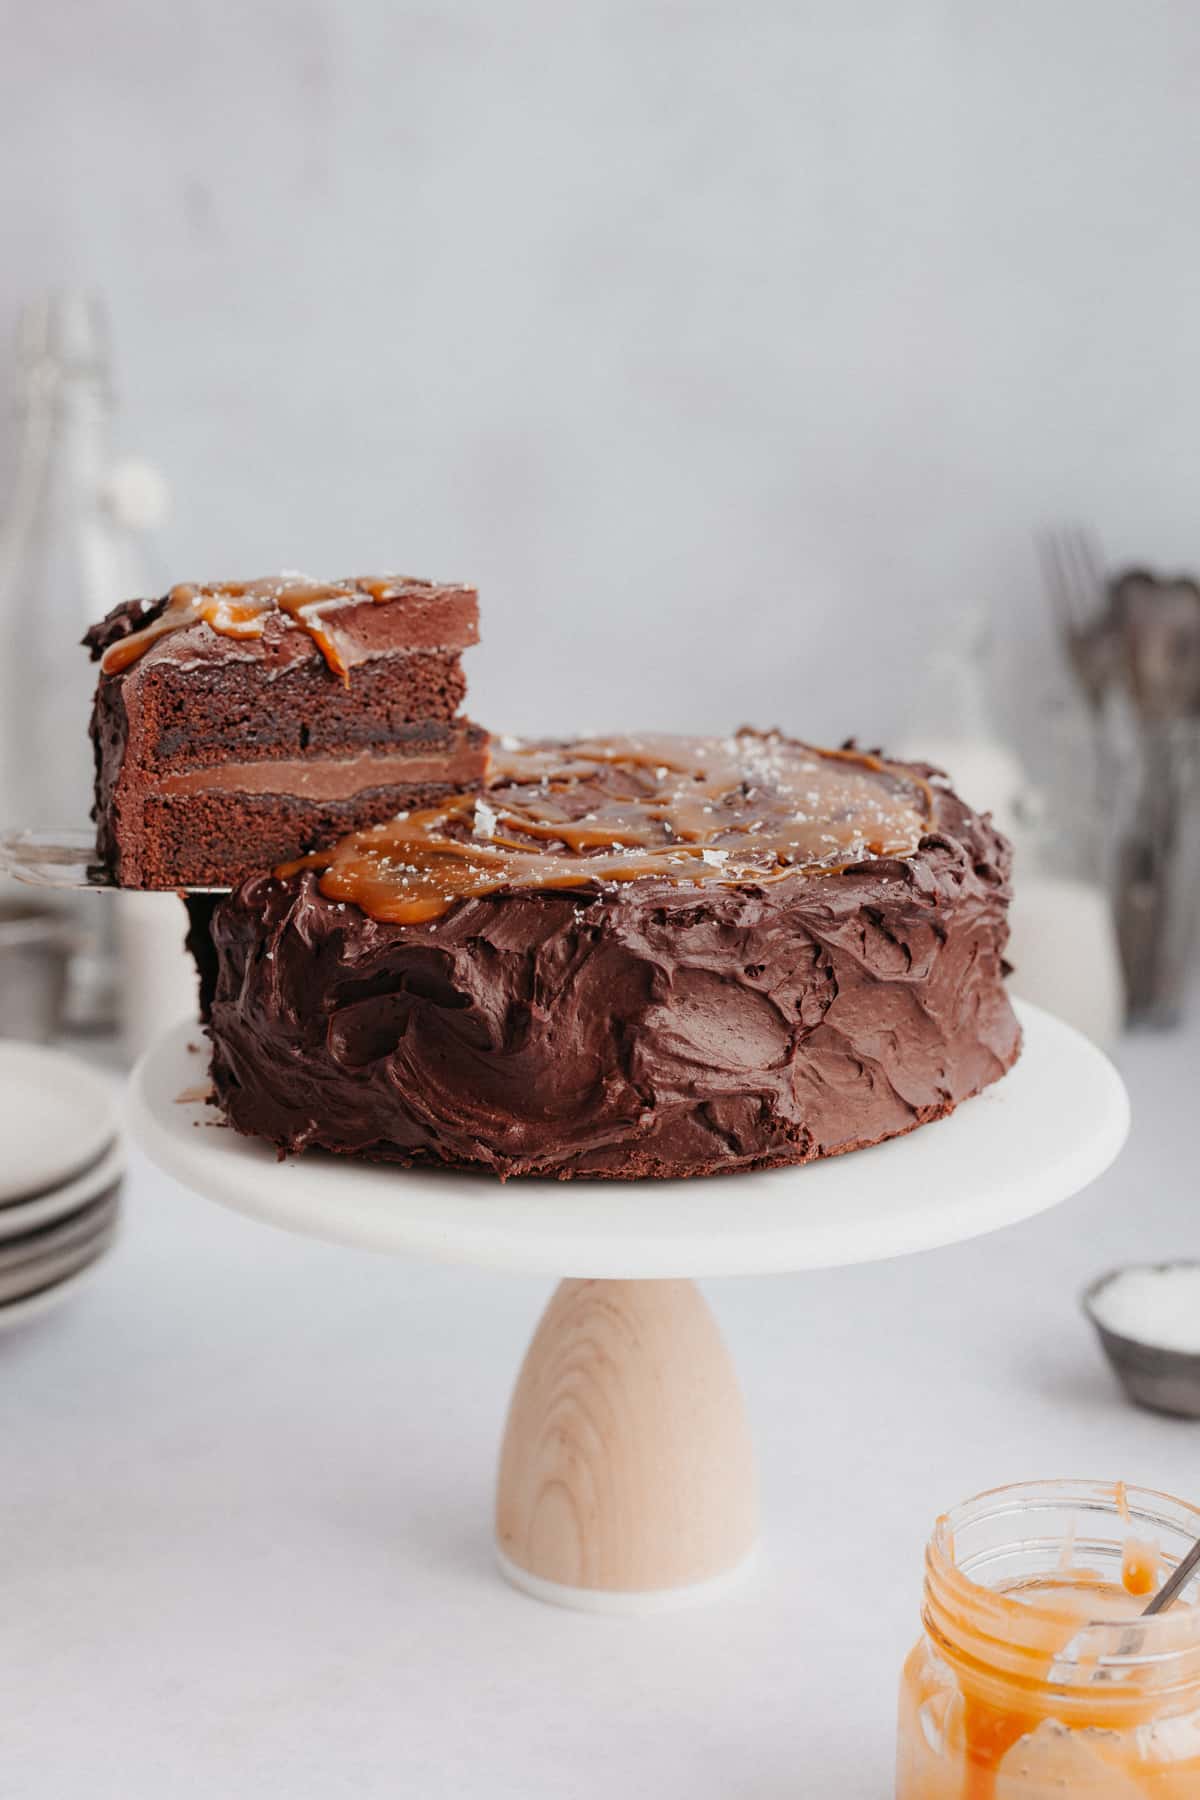 A chocolate cake with a caramel topping on a cake stand. One slice is being lifted out